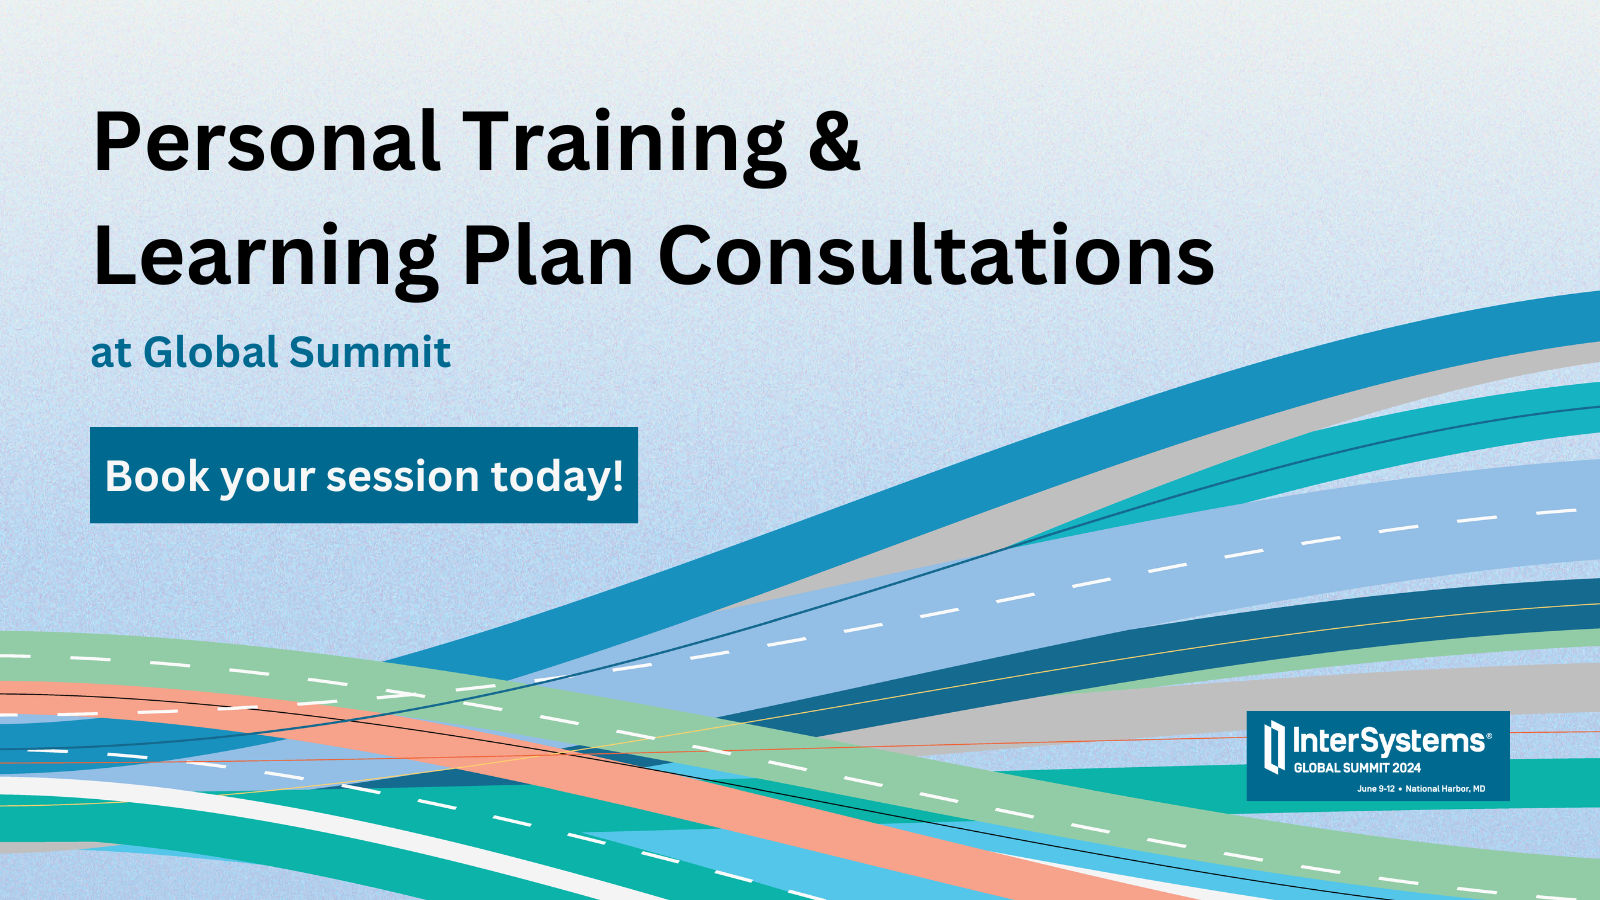 Personal training and learning plan consultations at Global Summit. Book your session today!